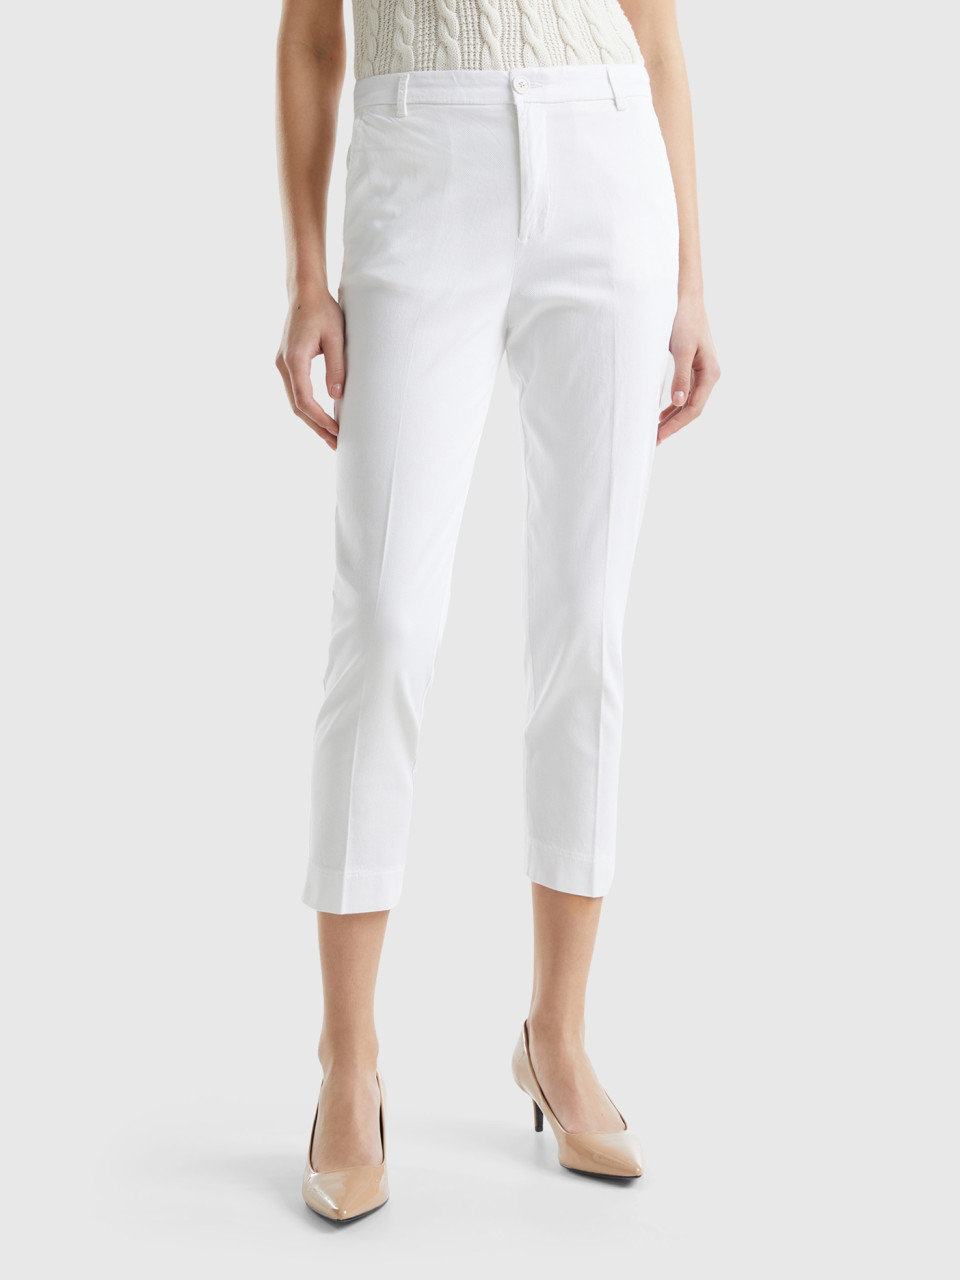 Benetton, Cropped Chinos In Stretch Cotton, White, Women